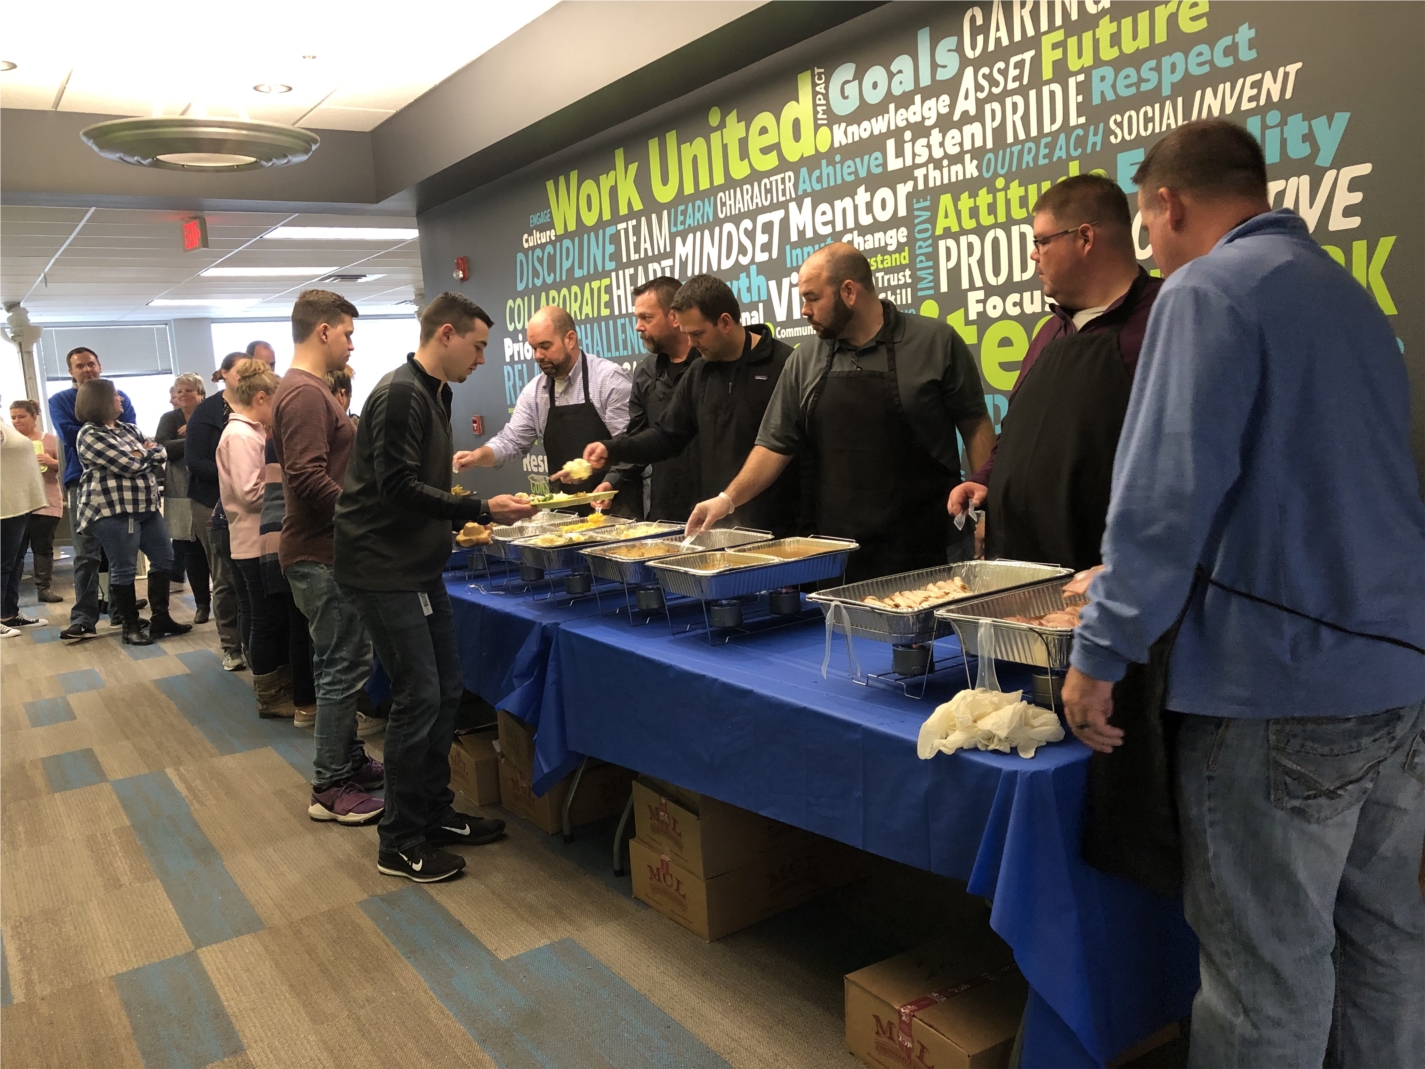 Serving Thanksgiving to our team